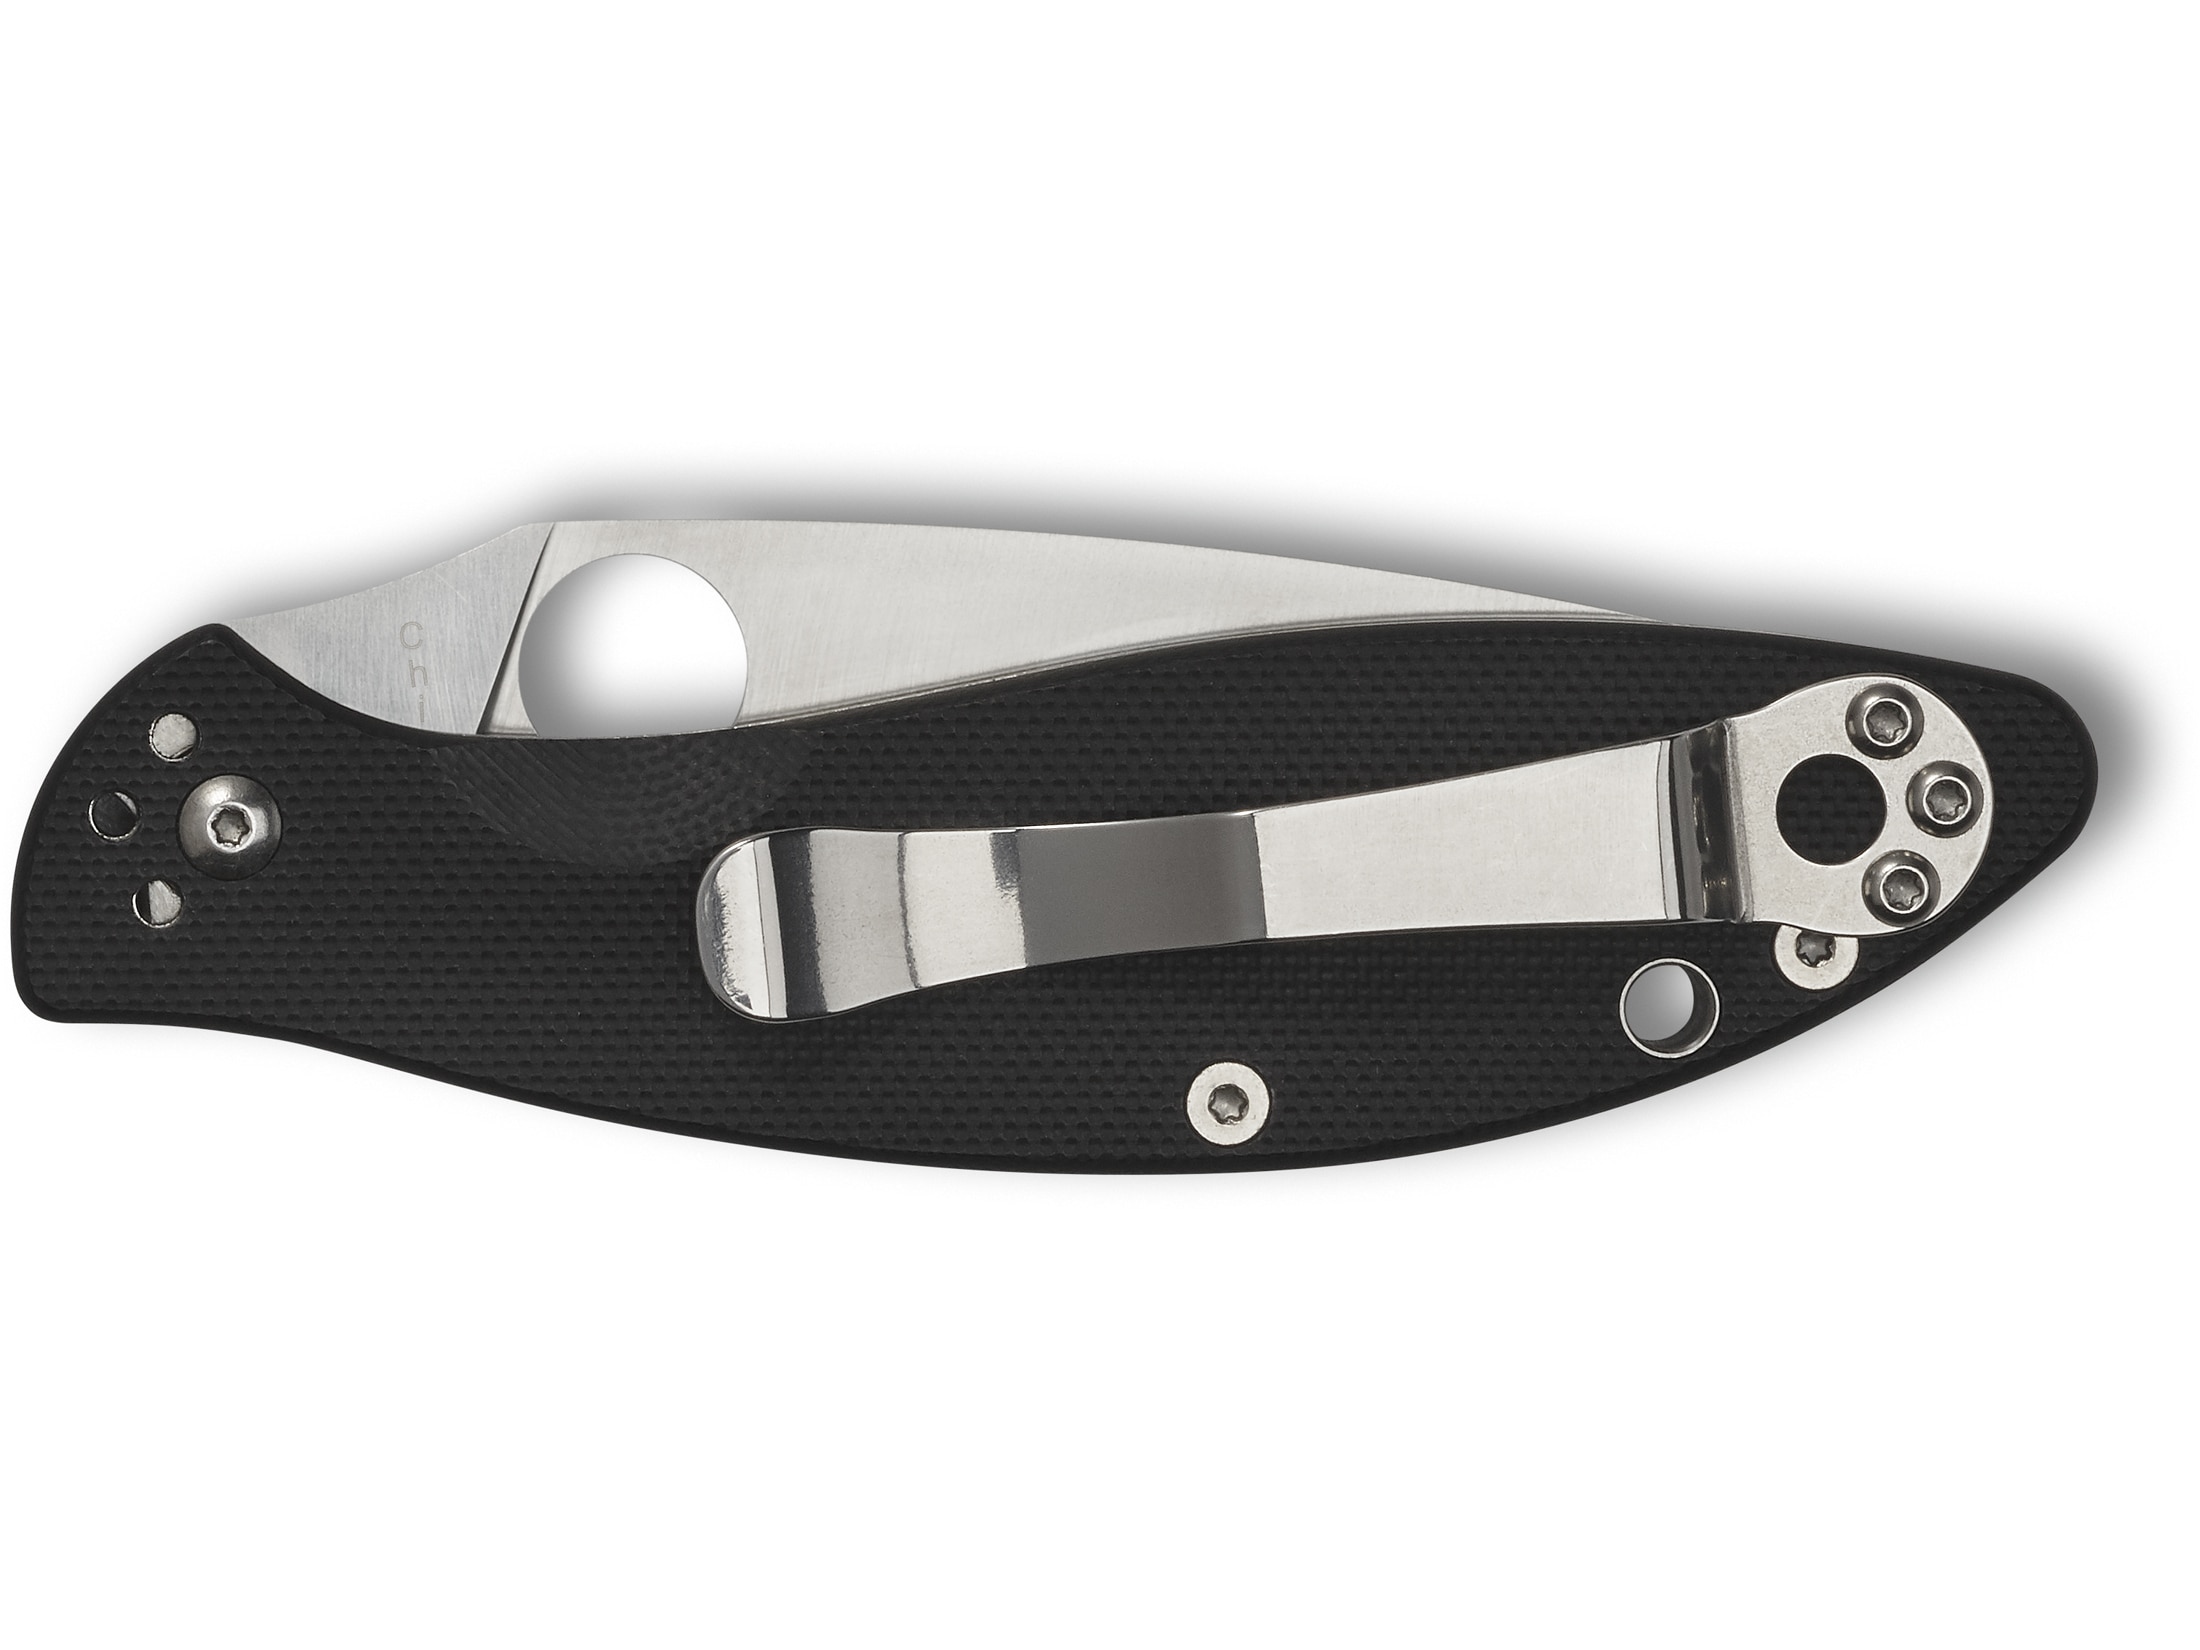 Spyderco Astute Folding Knife 3.02″ Drop Point 8Cr13MoV Stainless Satin Blade G-10 Handle Black For Sale